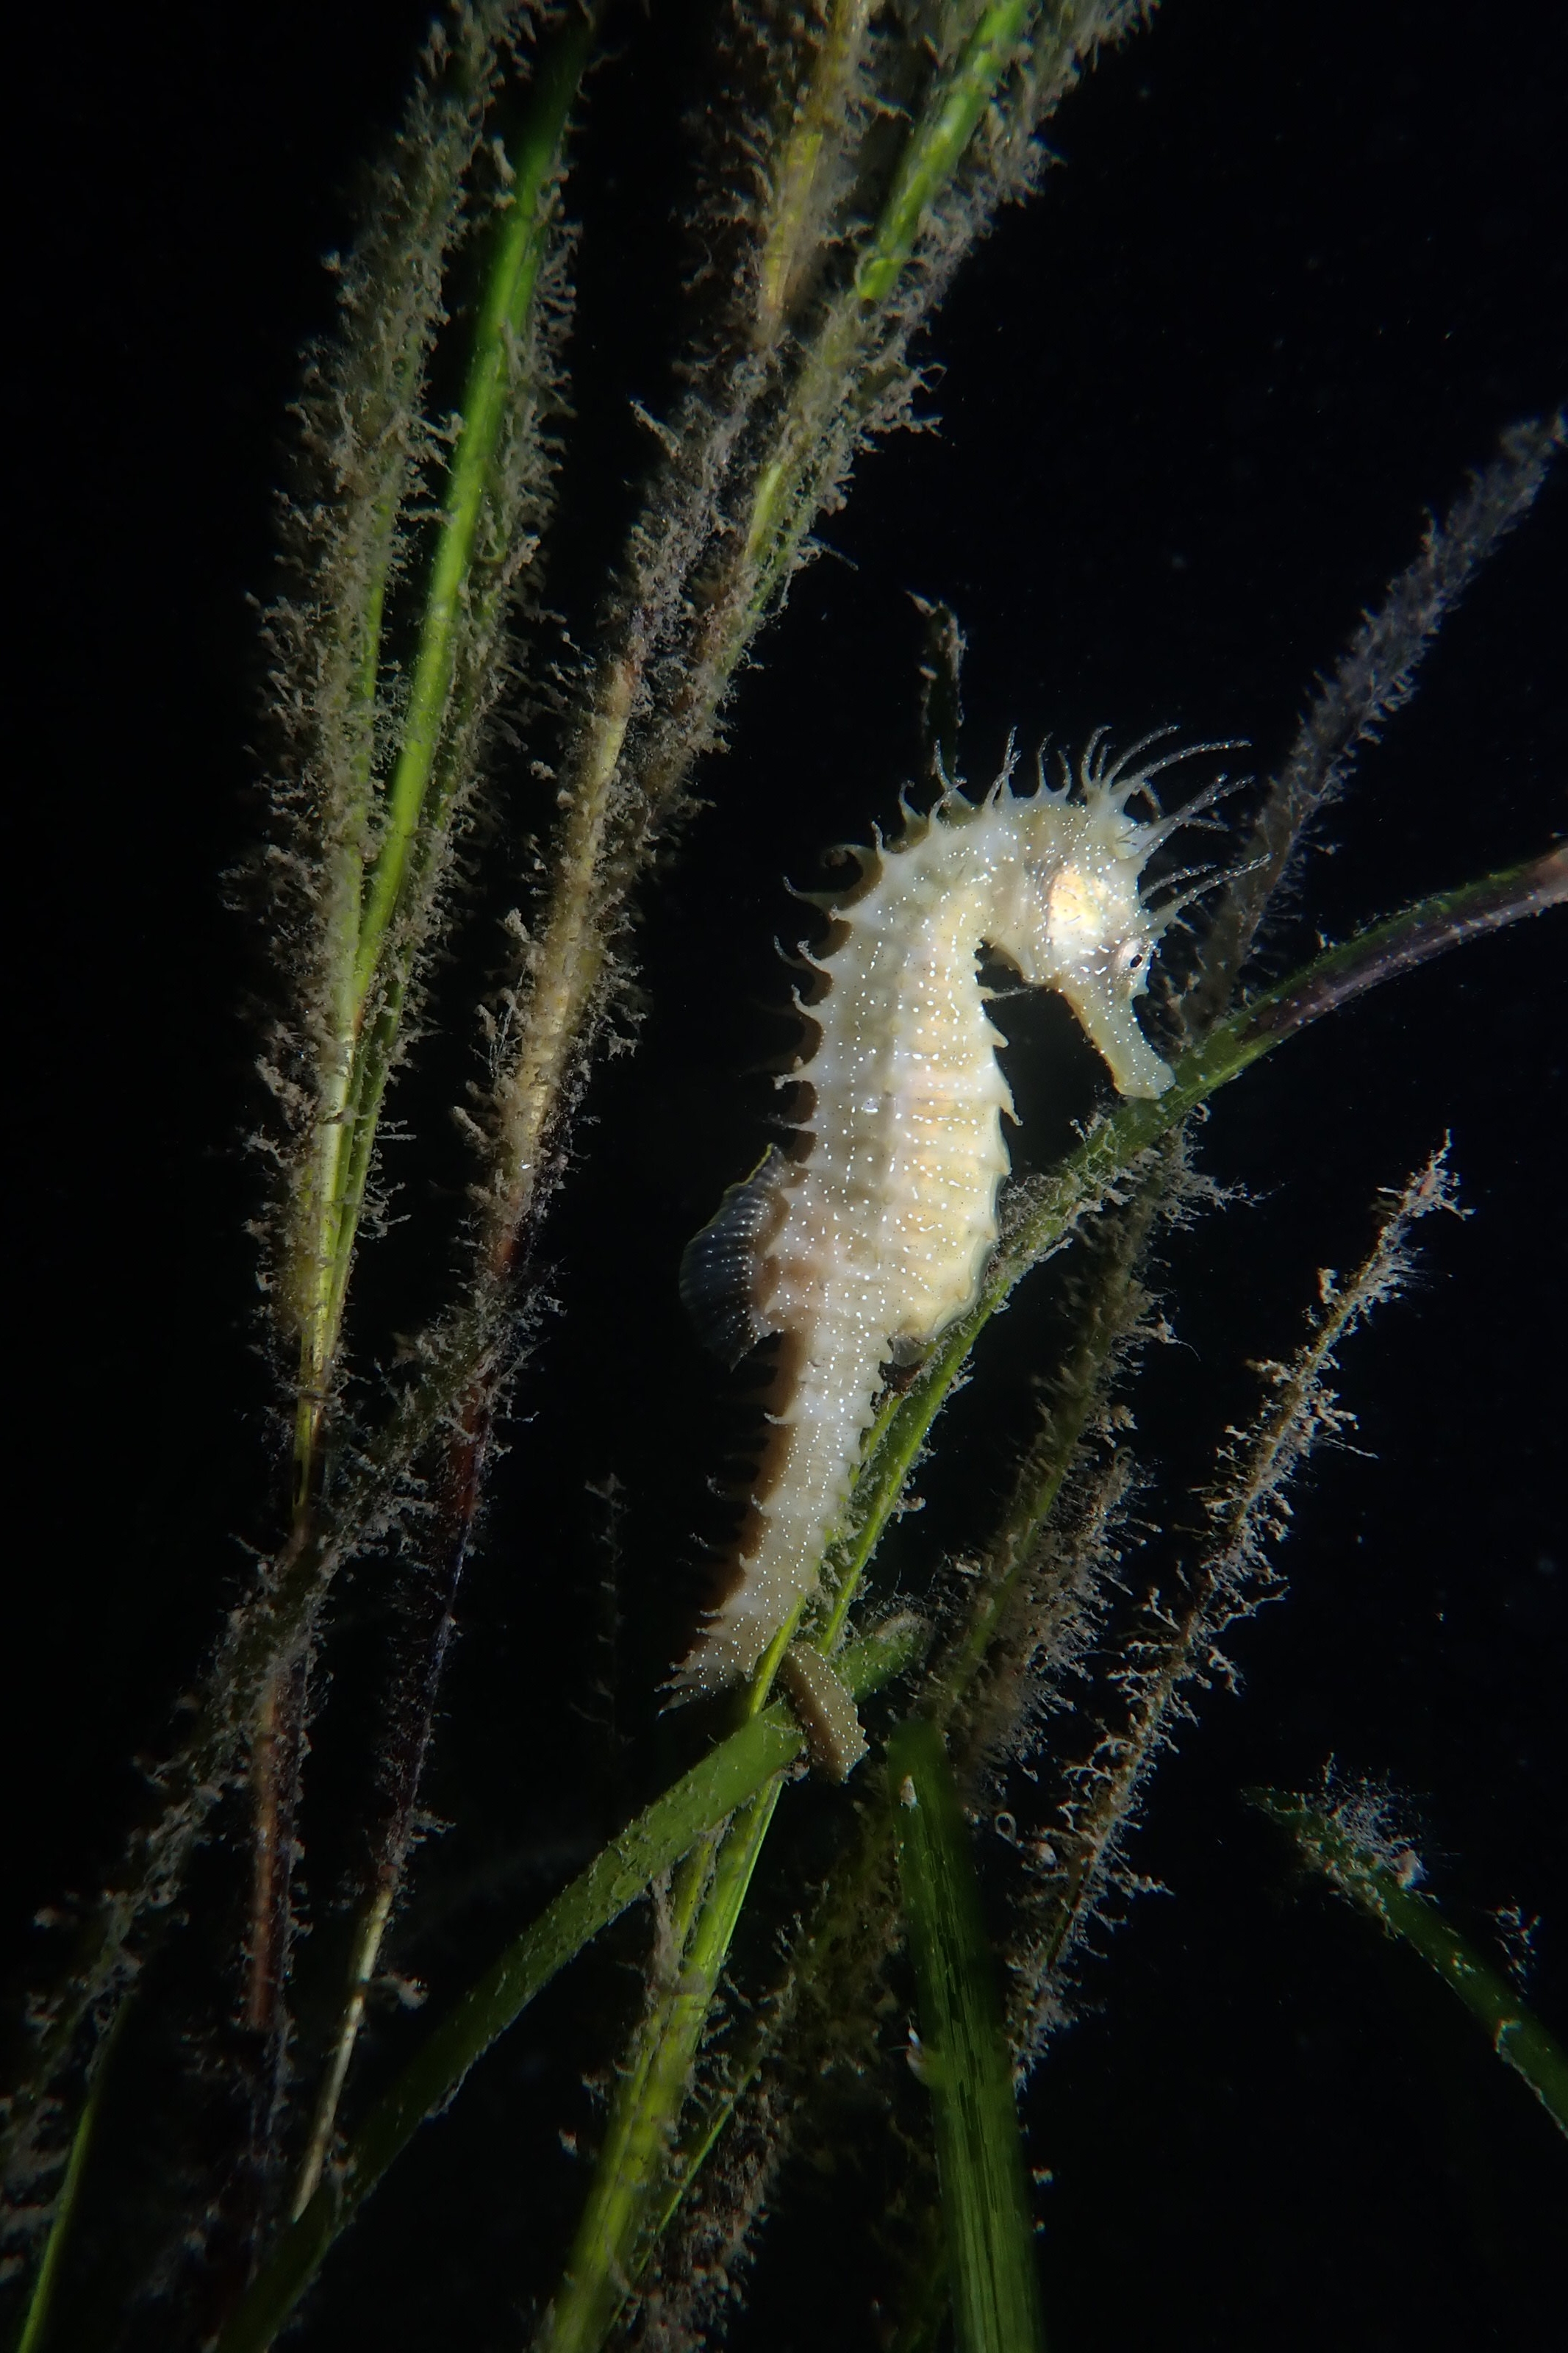 Life in the seagrass with this seahorse.